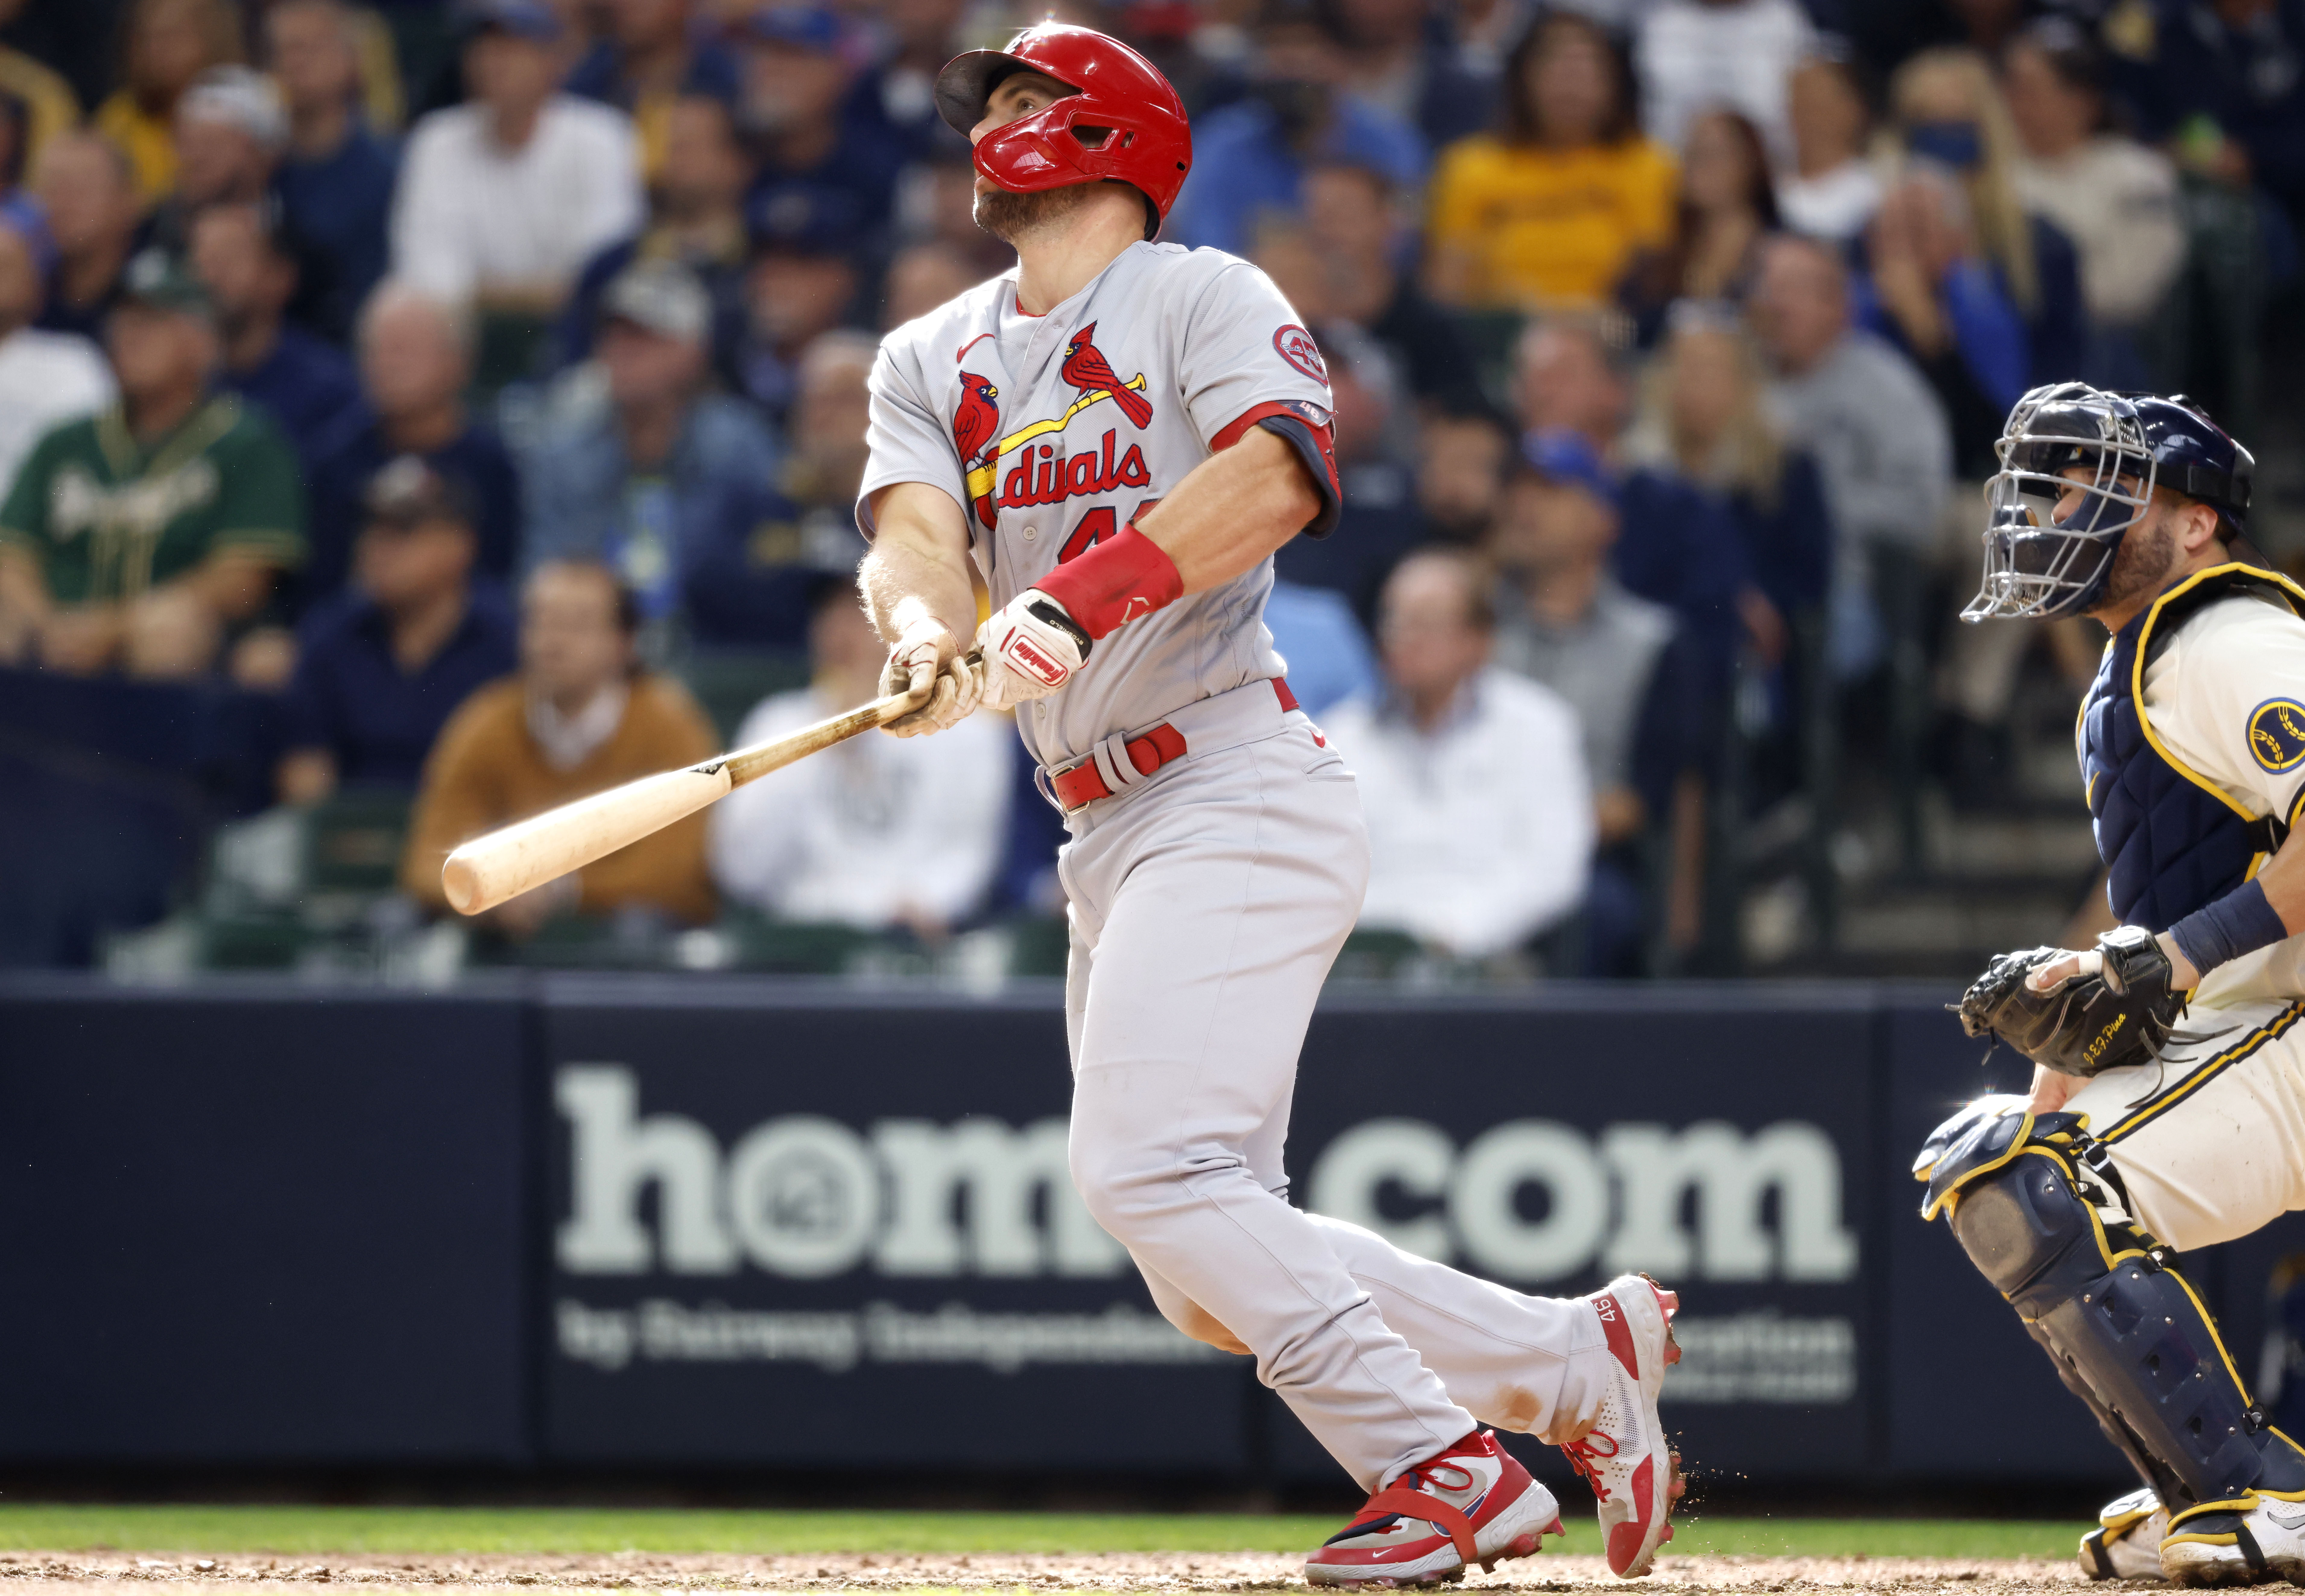 The Cardinals fight back from early deficit before faltering late